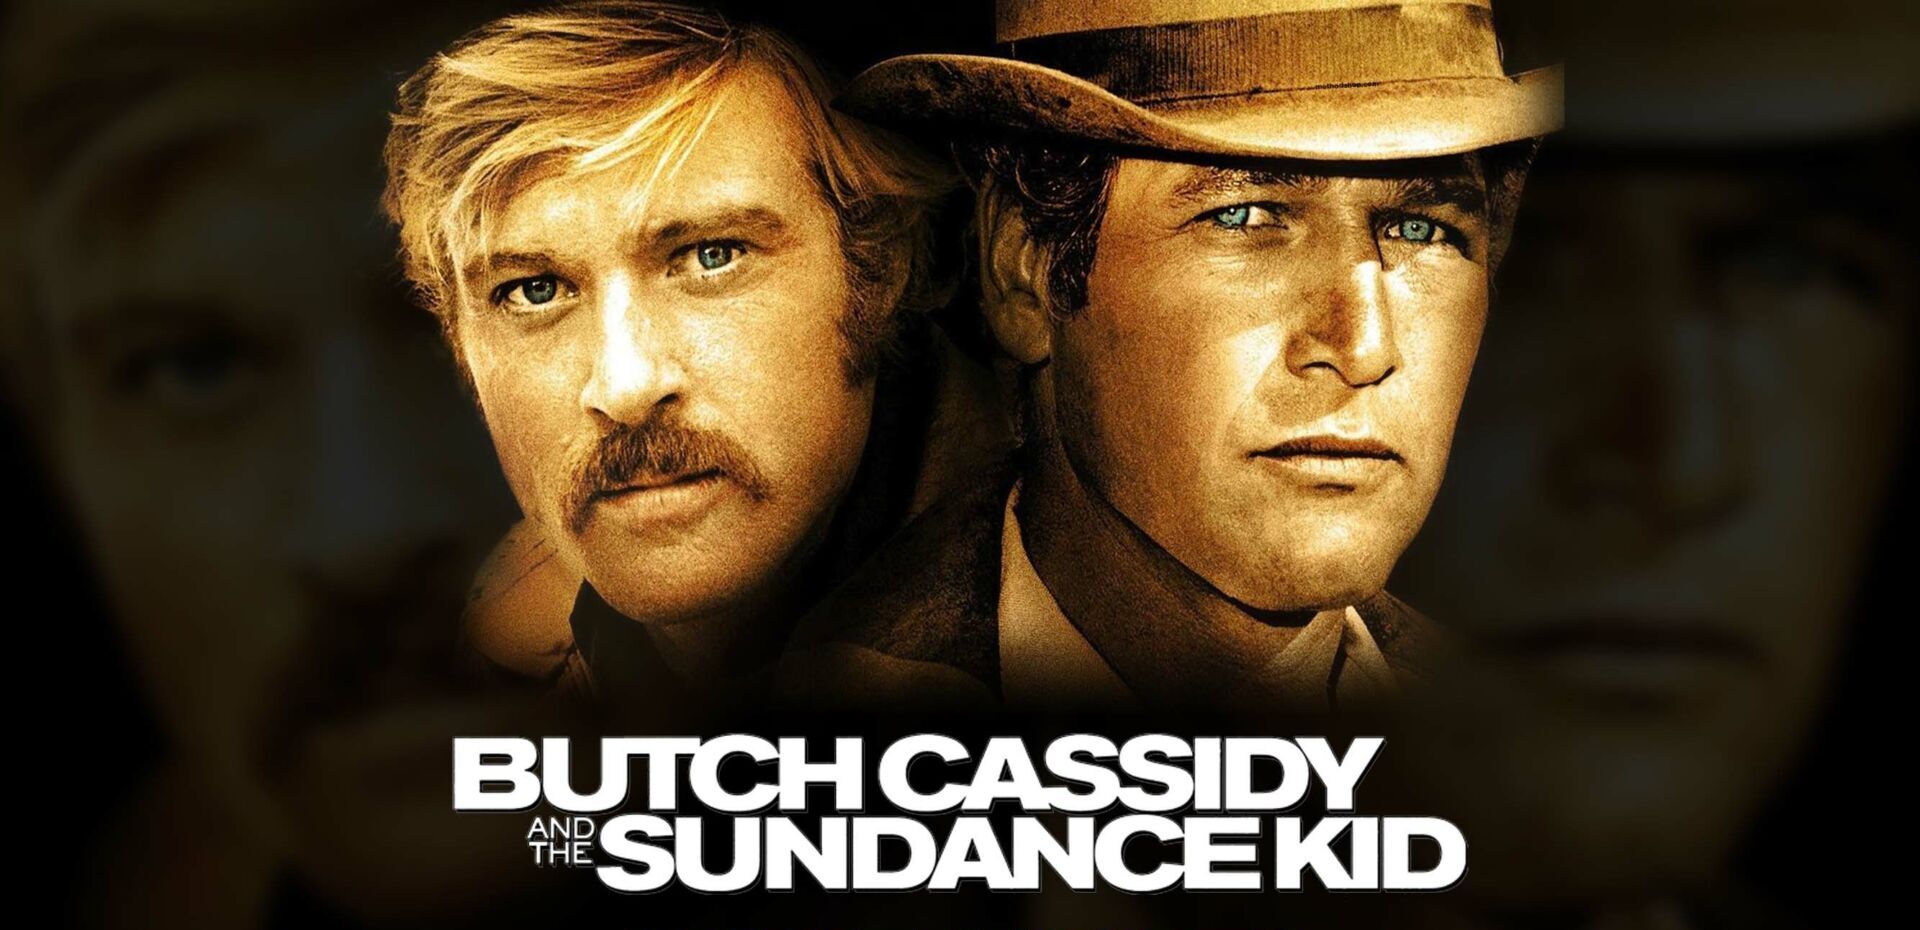 44-facts-about-the-movie-butch-cassidy-and-the-sundance-kid